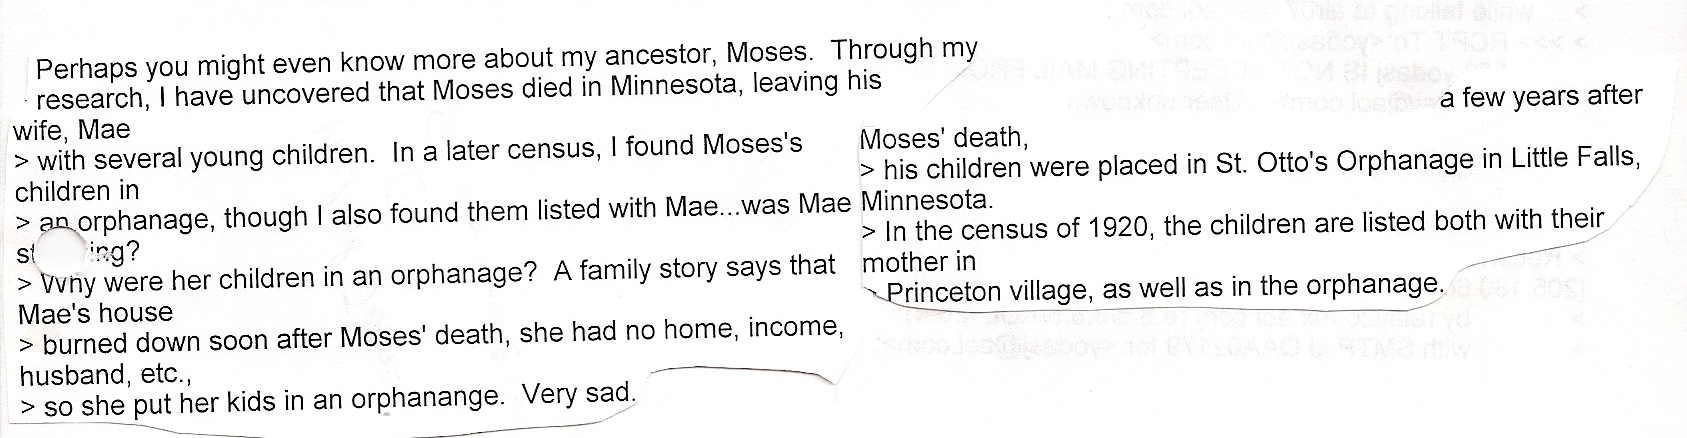 2- moses info on the orphanage 2